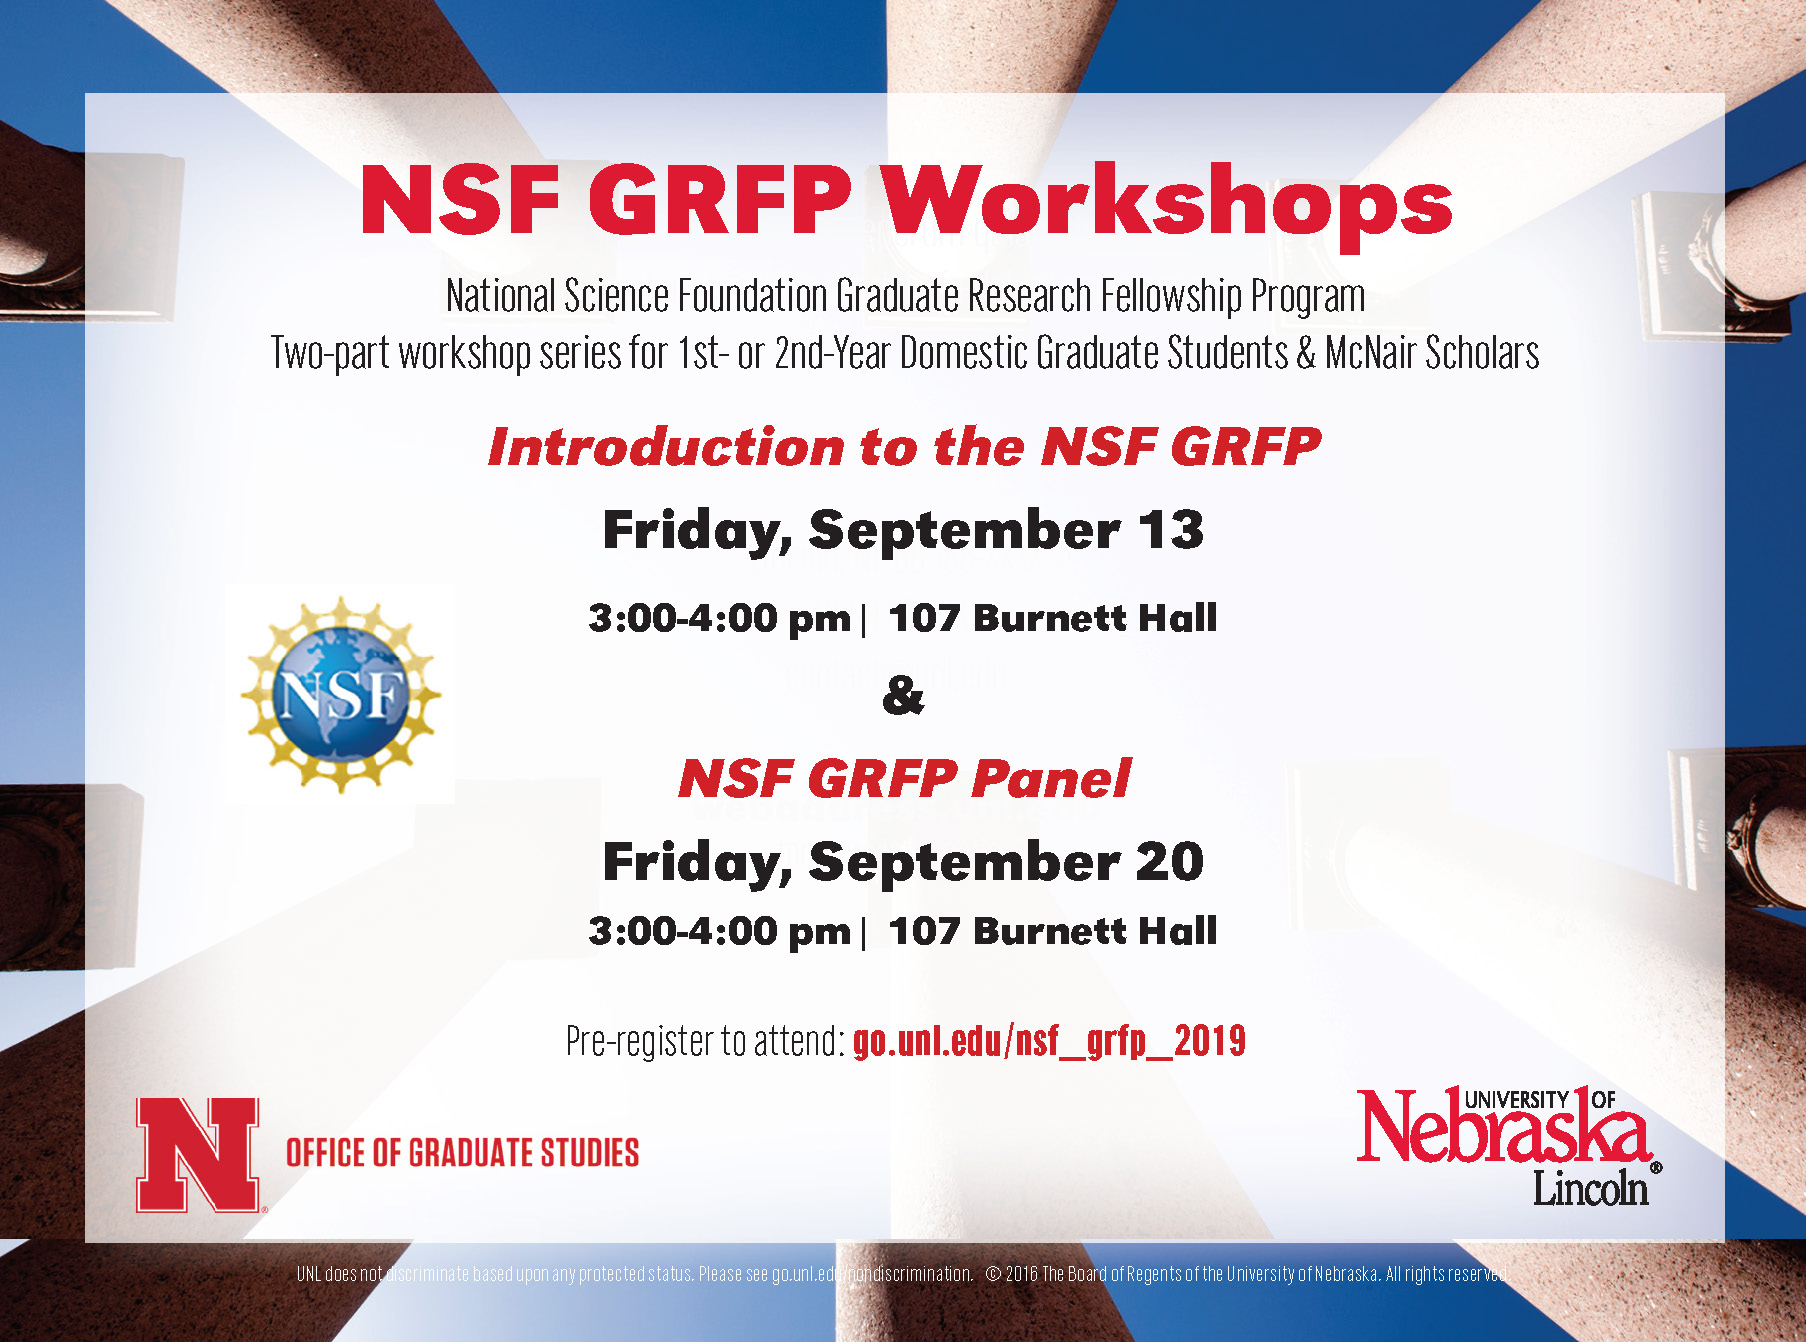 NSF GRFP Bootcamp offered September 13 and 20th Announce University